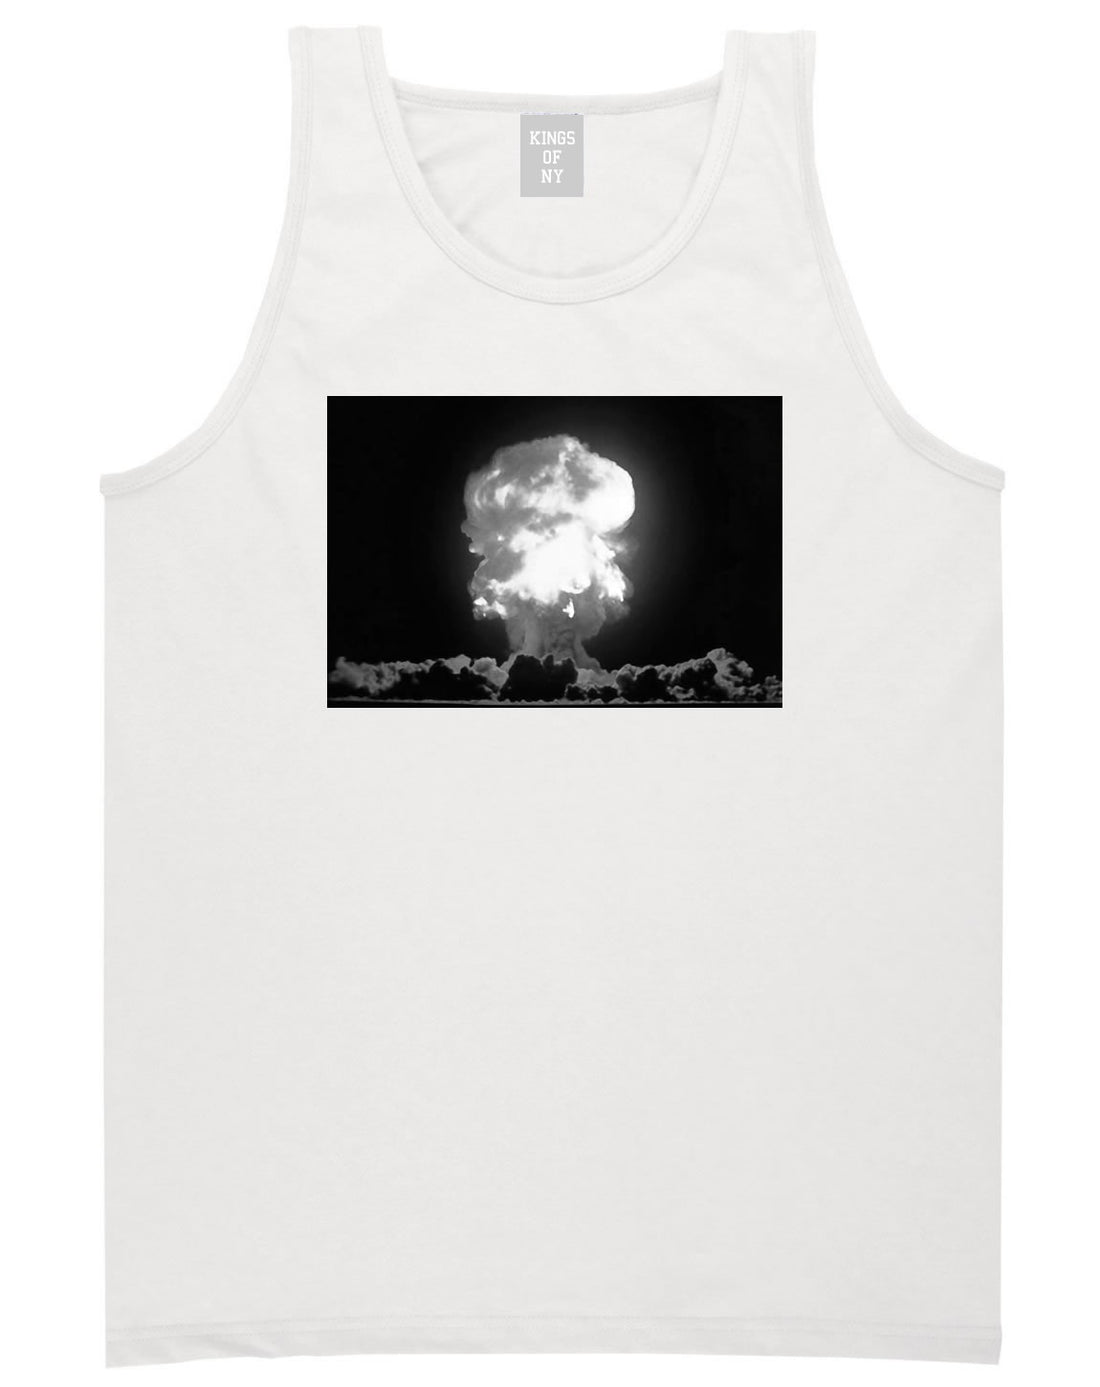 Explosion Nuclear Bomb Cloud Tank Top in White By Kings Of NY